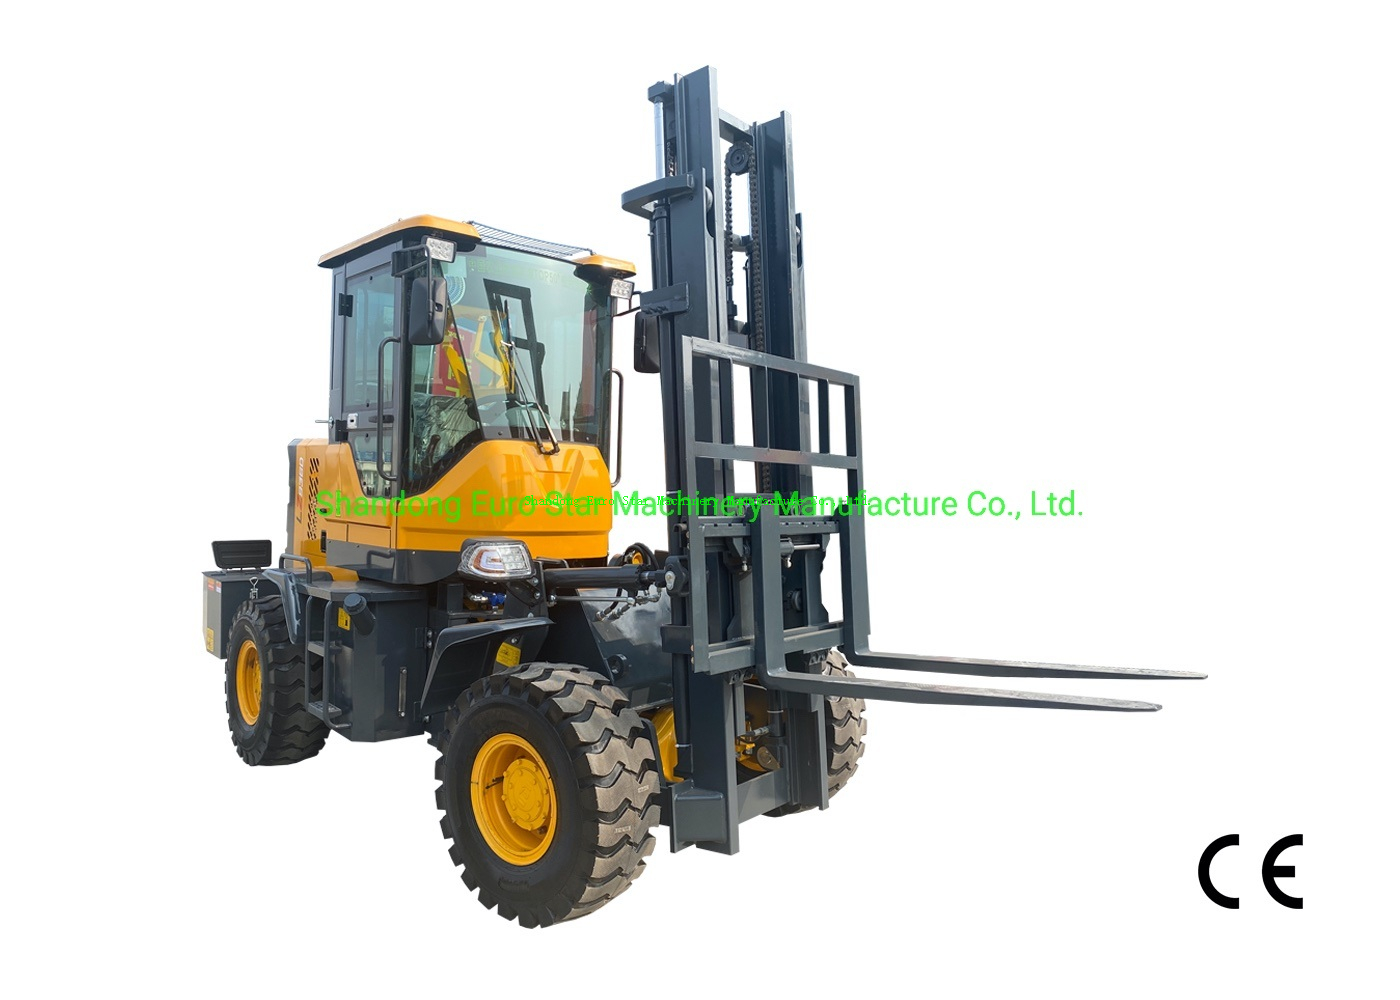 1-6t-Ez936-Wheel-Loader-Multi-Functional-Mini-Small-CE-Approved-China-Farm-Construction-Medium-Bucket-Machinery-Compact-Backhoe-Excavator-Front-End-Loader.jpg